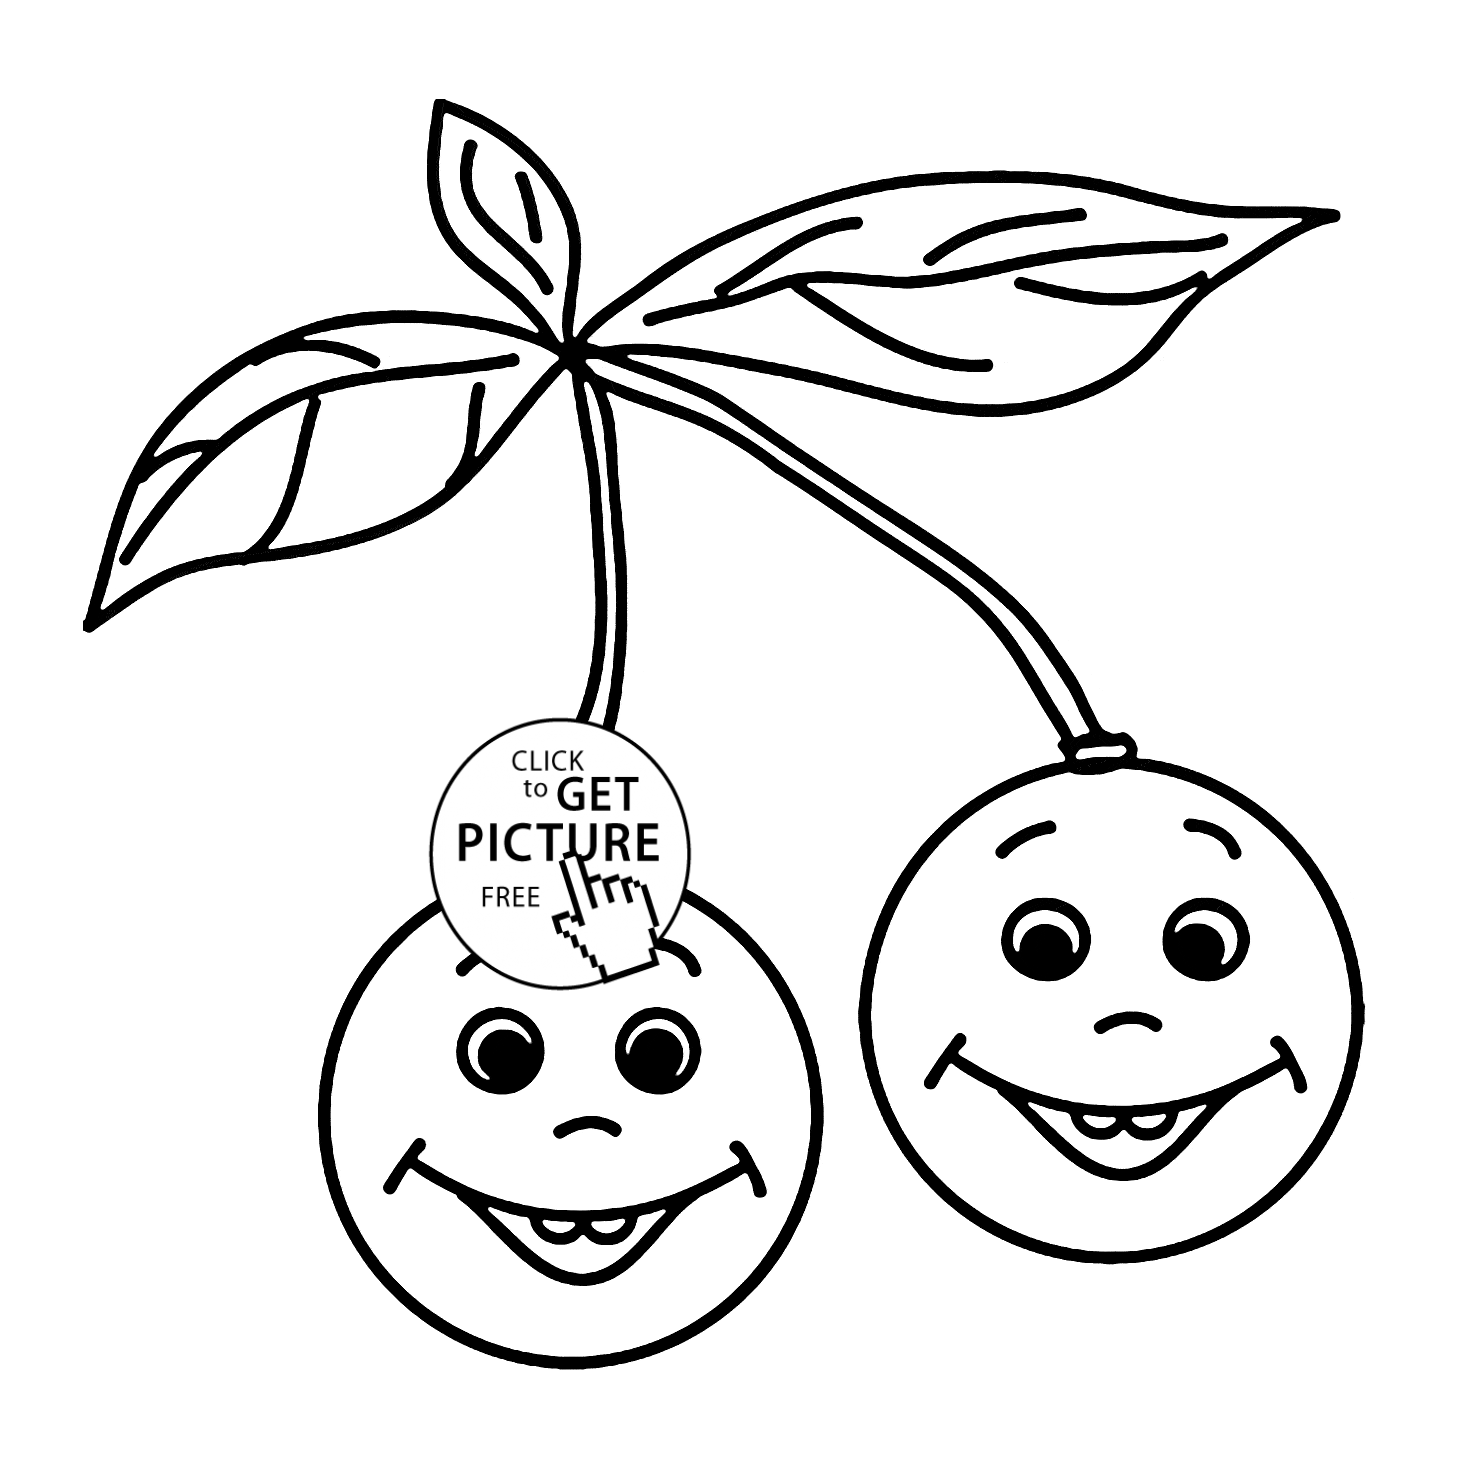 Cherries smiling fruit coloring page for kids, fruits coloring ...